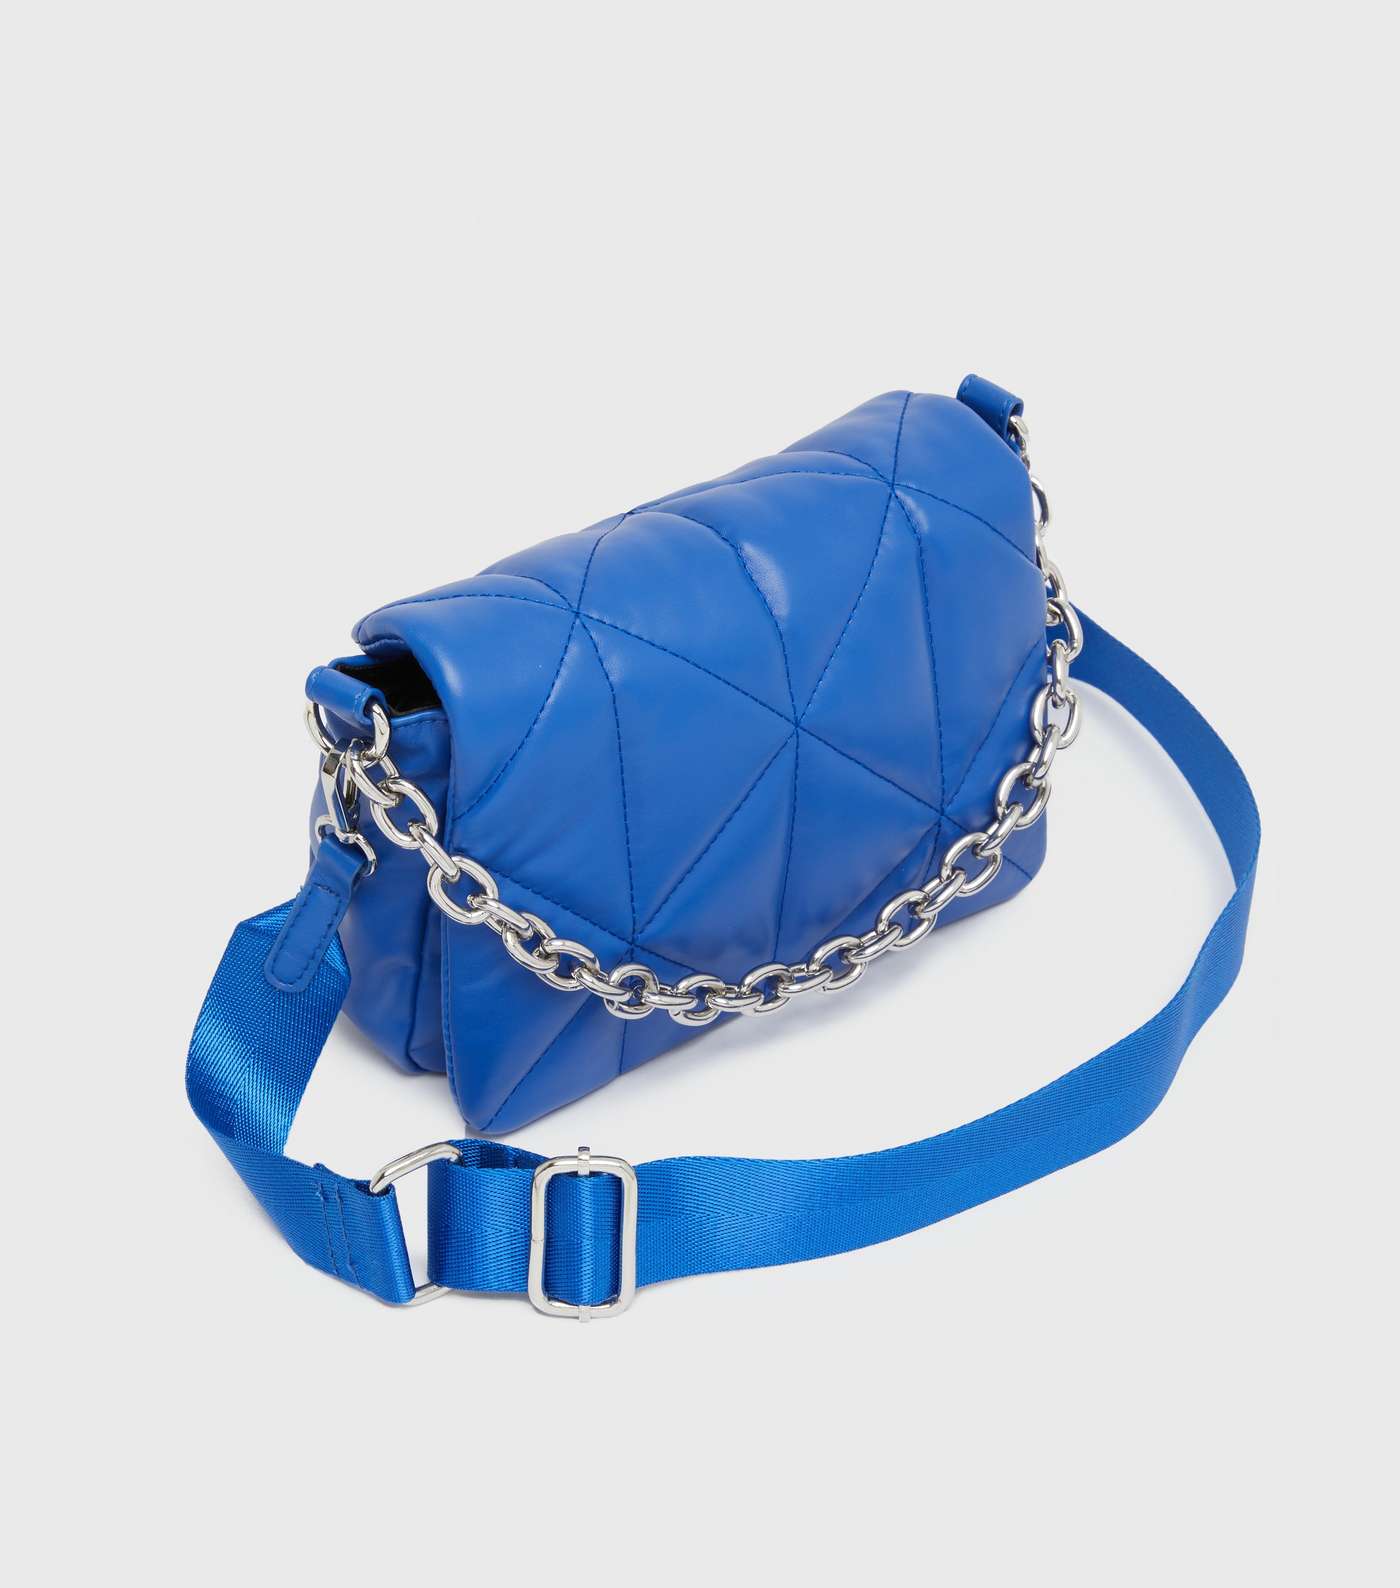 Bright Blue Leather-Look Chain Webbed Shoulder Strap Cross Body Bag Image 3